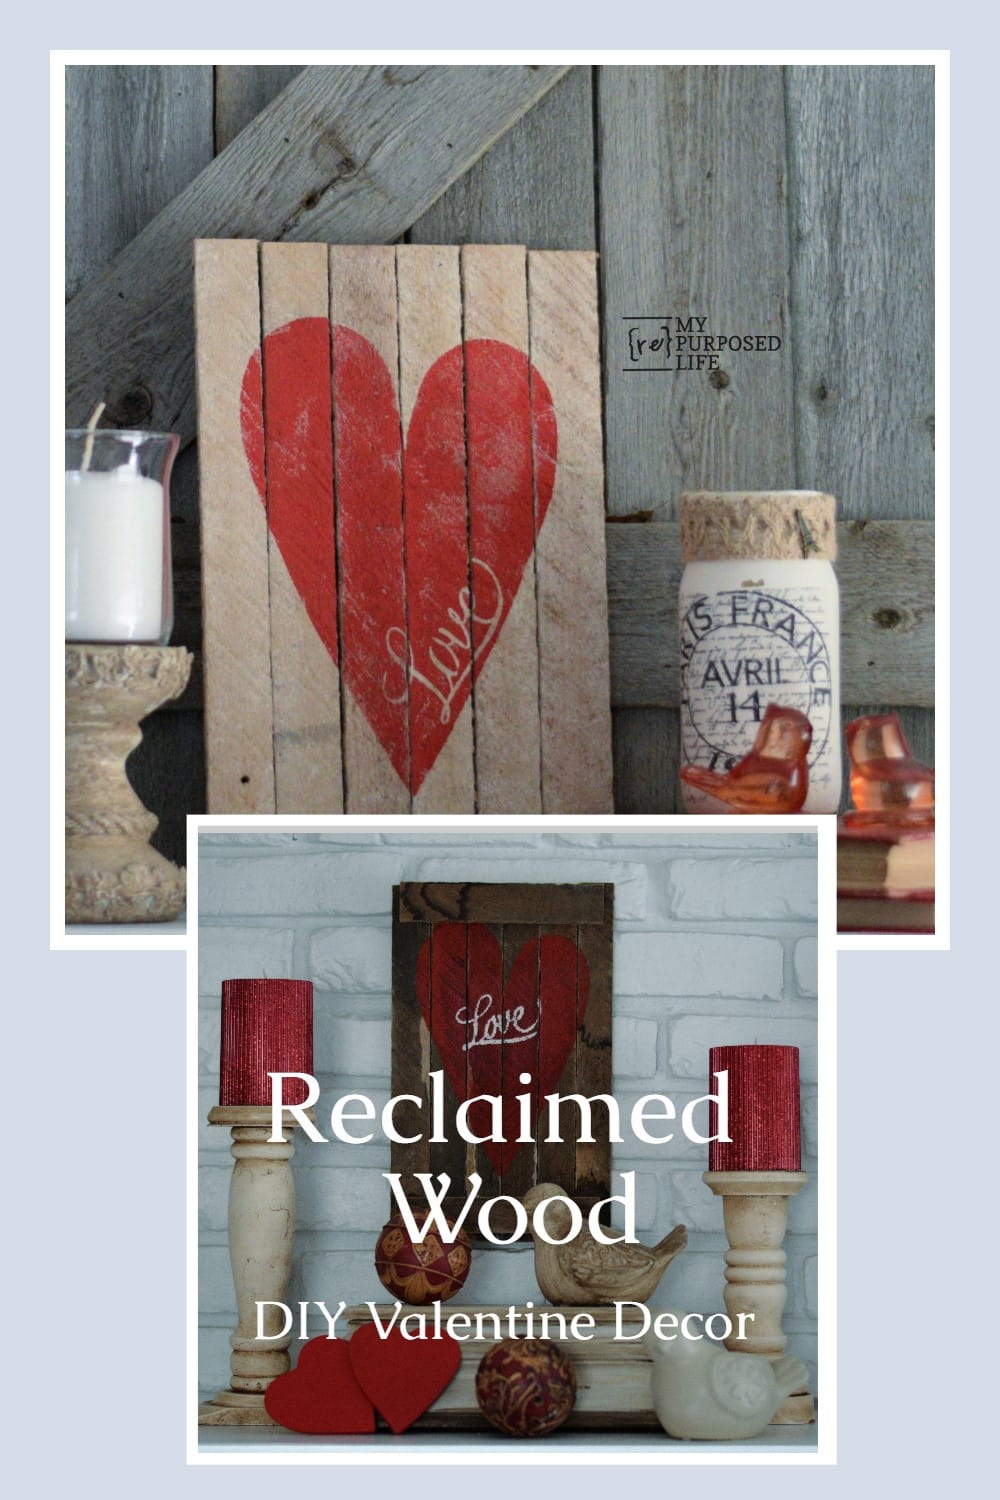 Easy Valentines day diy decor to make. This easy project is a great last minute valentine craft to make out of reclaimed wood. Love, red heart decor. #MyRepurposedLife #diy #Valentines #decor #rustic via @repurposedlife